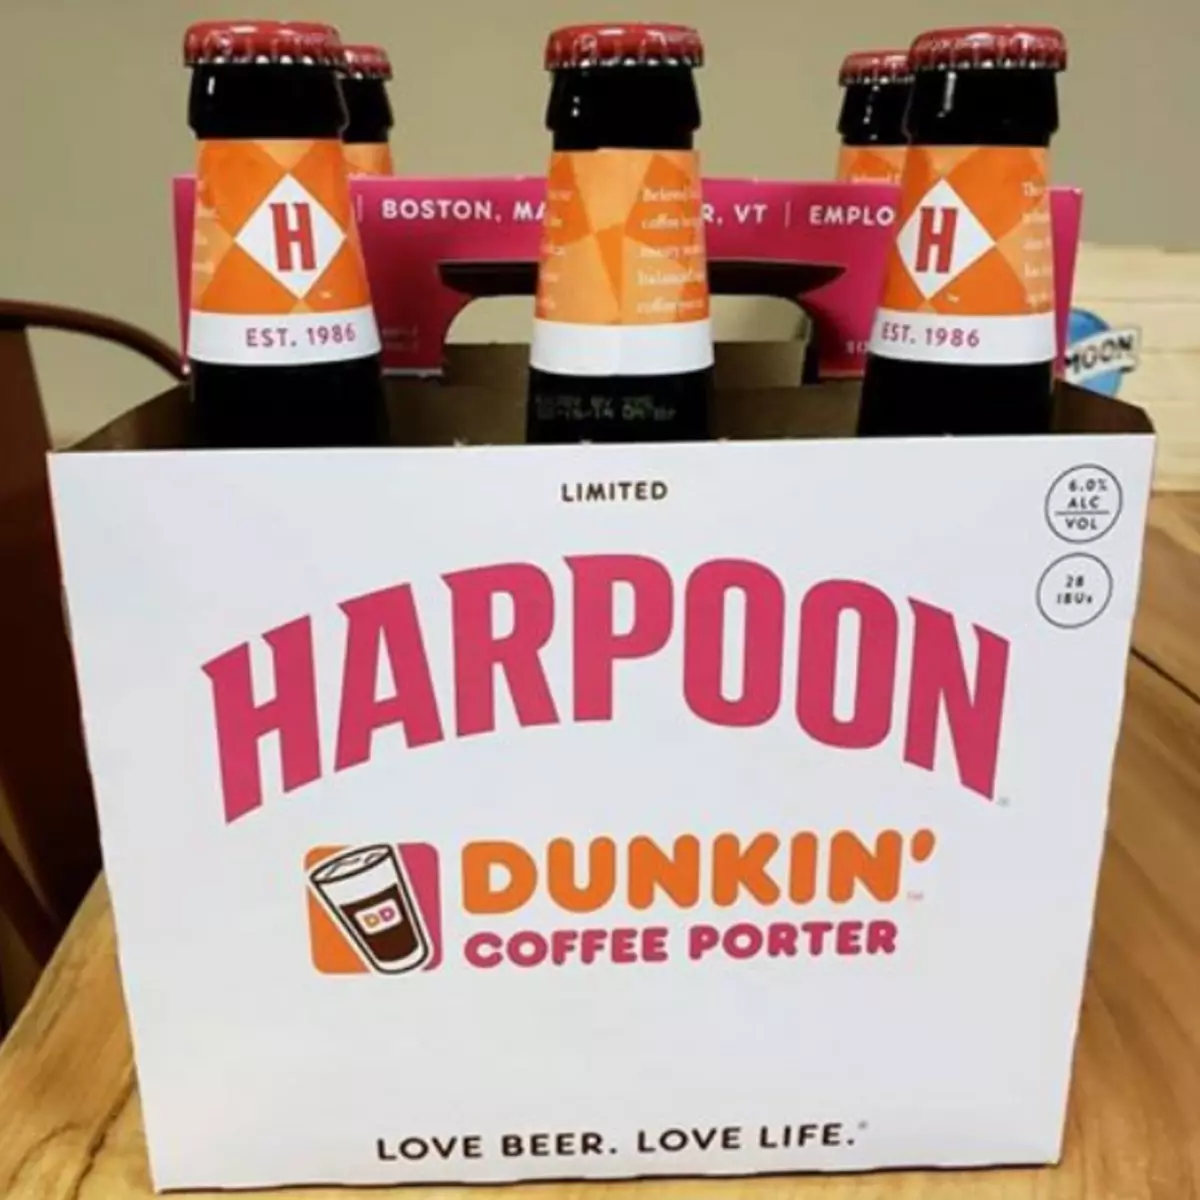 Dunkin' Donuts Coffee Beer Has Arrived In CNY